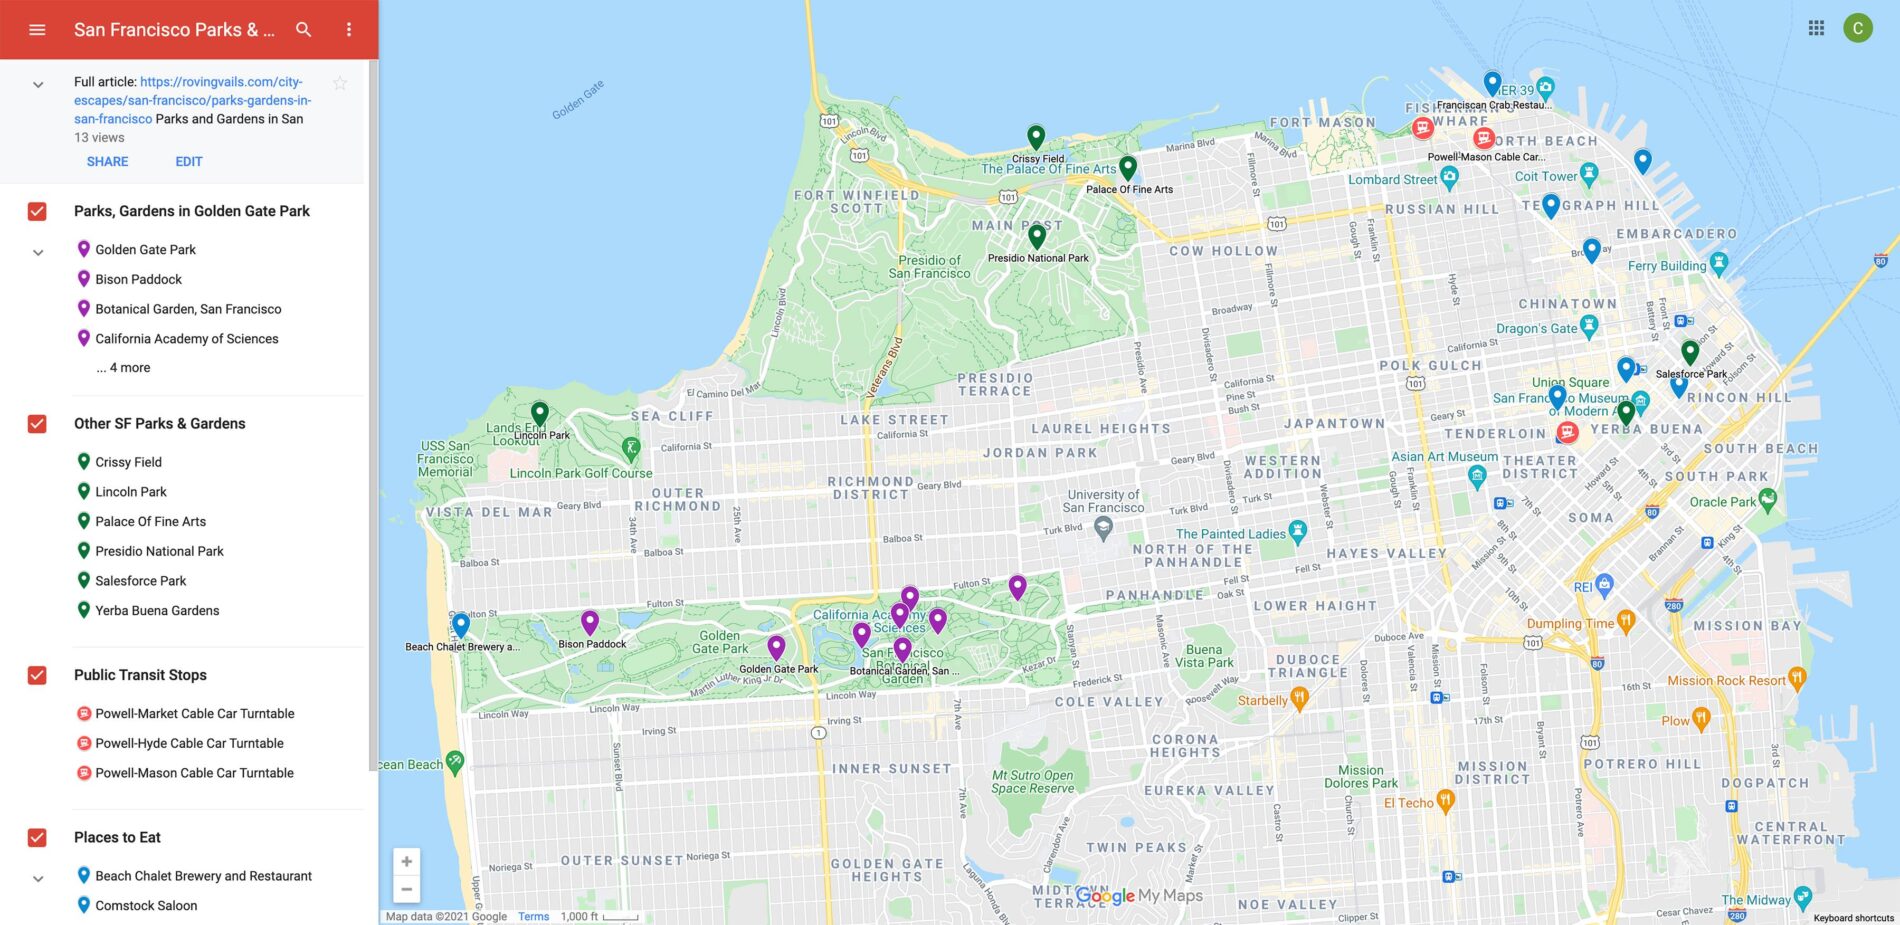 Interactive map with pins marking 12 extraordinary Parks and Gardens in San Francisco.